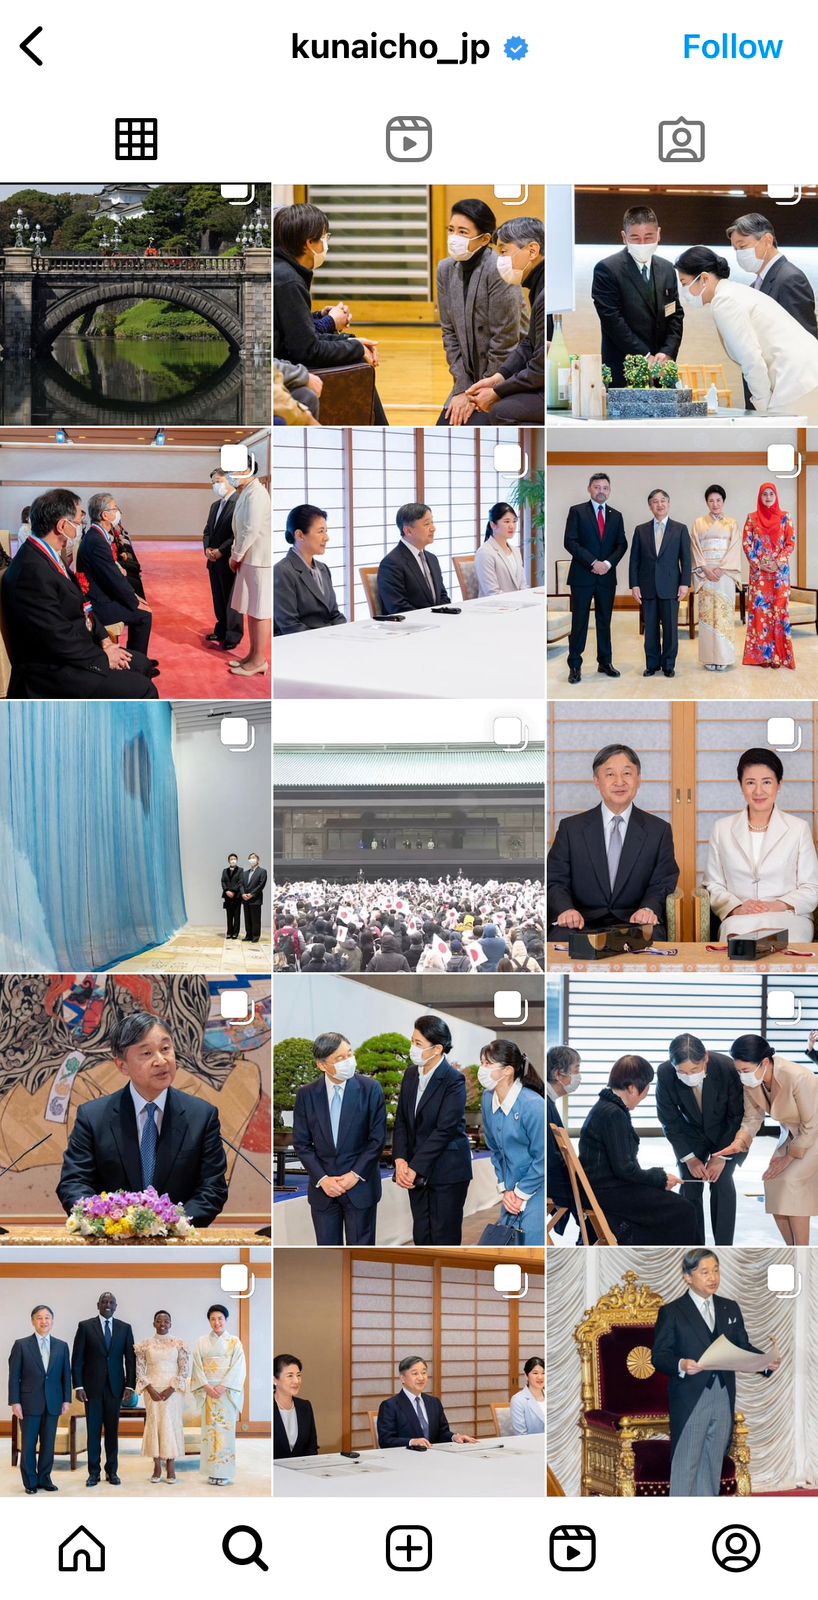 royal family of japan instagram account